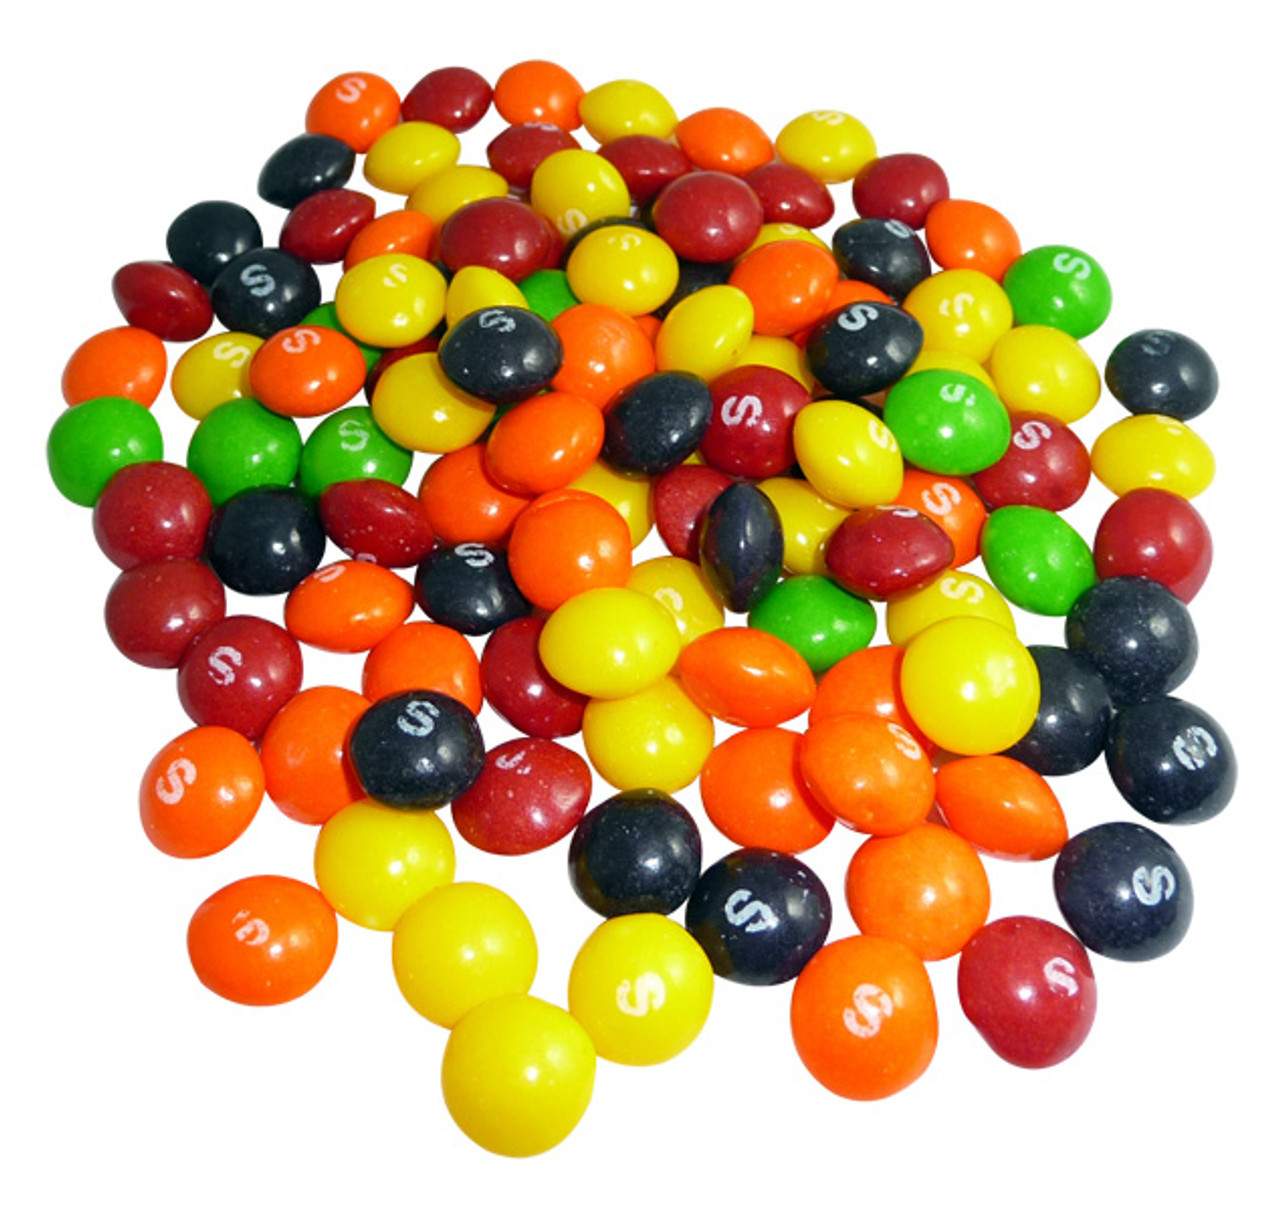 Skittles - Fruit, and other Confectionery at Australias cheapest